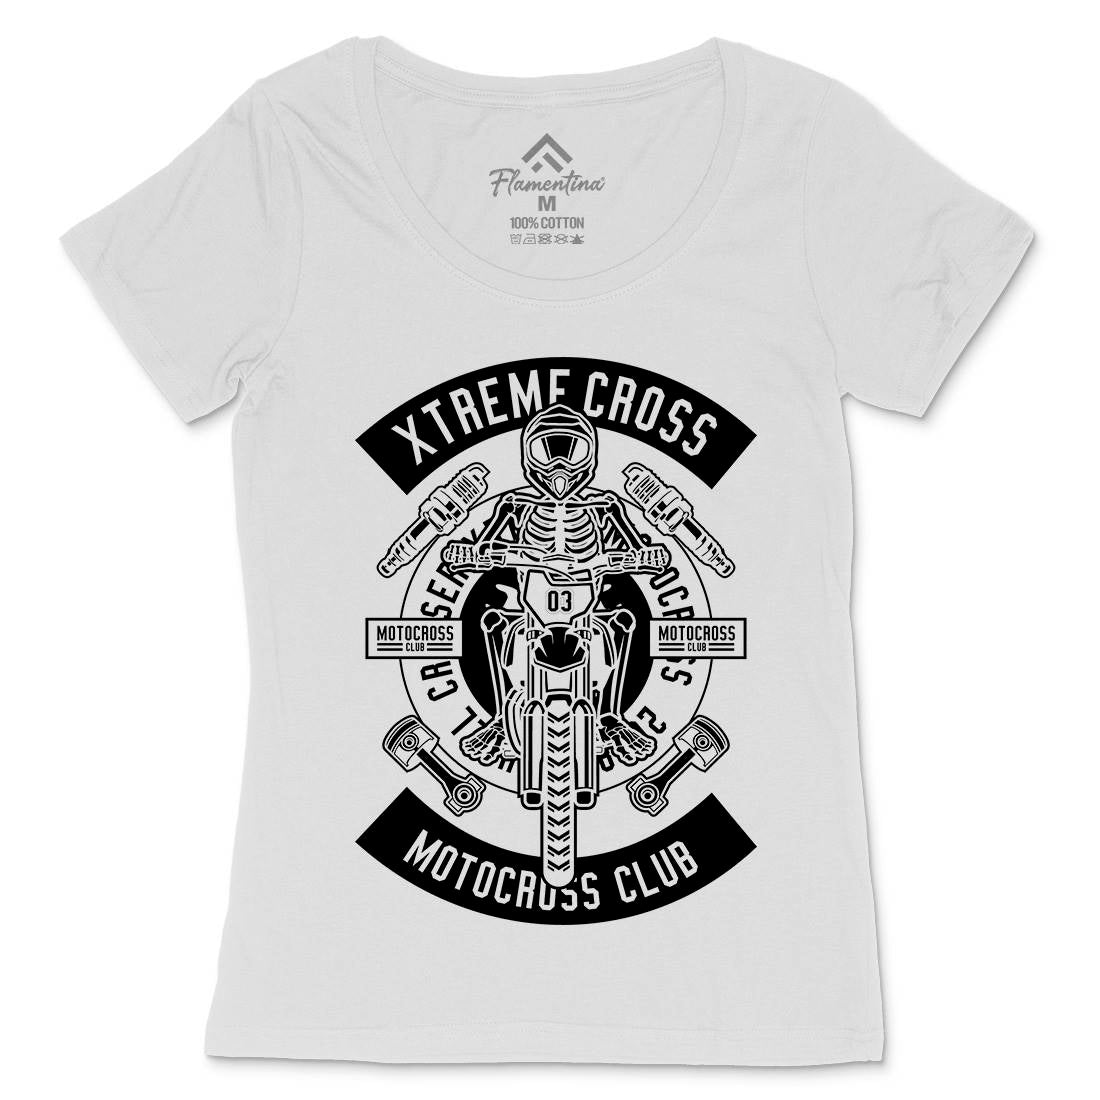 Xtreme Cross Womens Scoop Neck T-Shirt Motorcycles B676